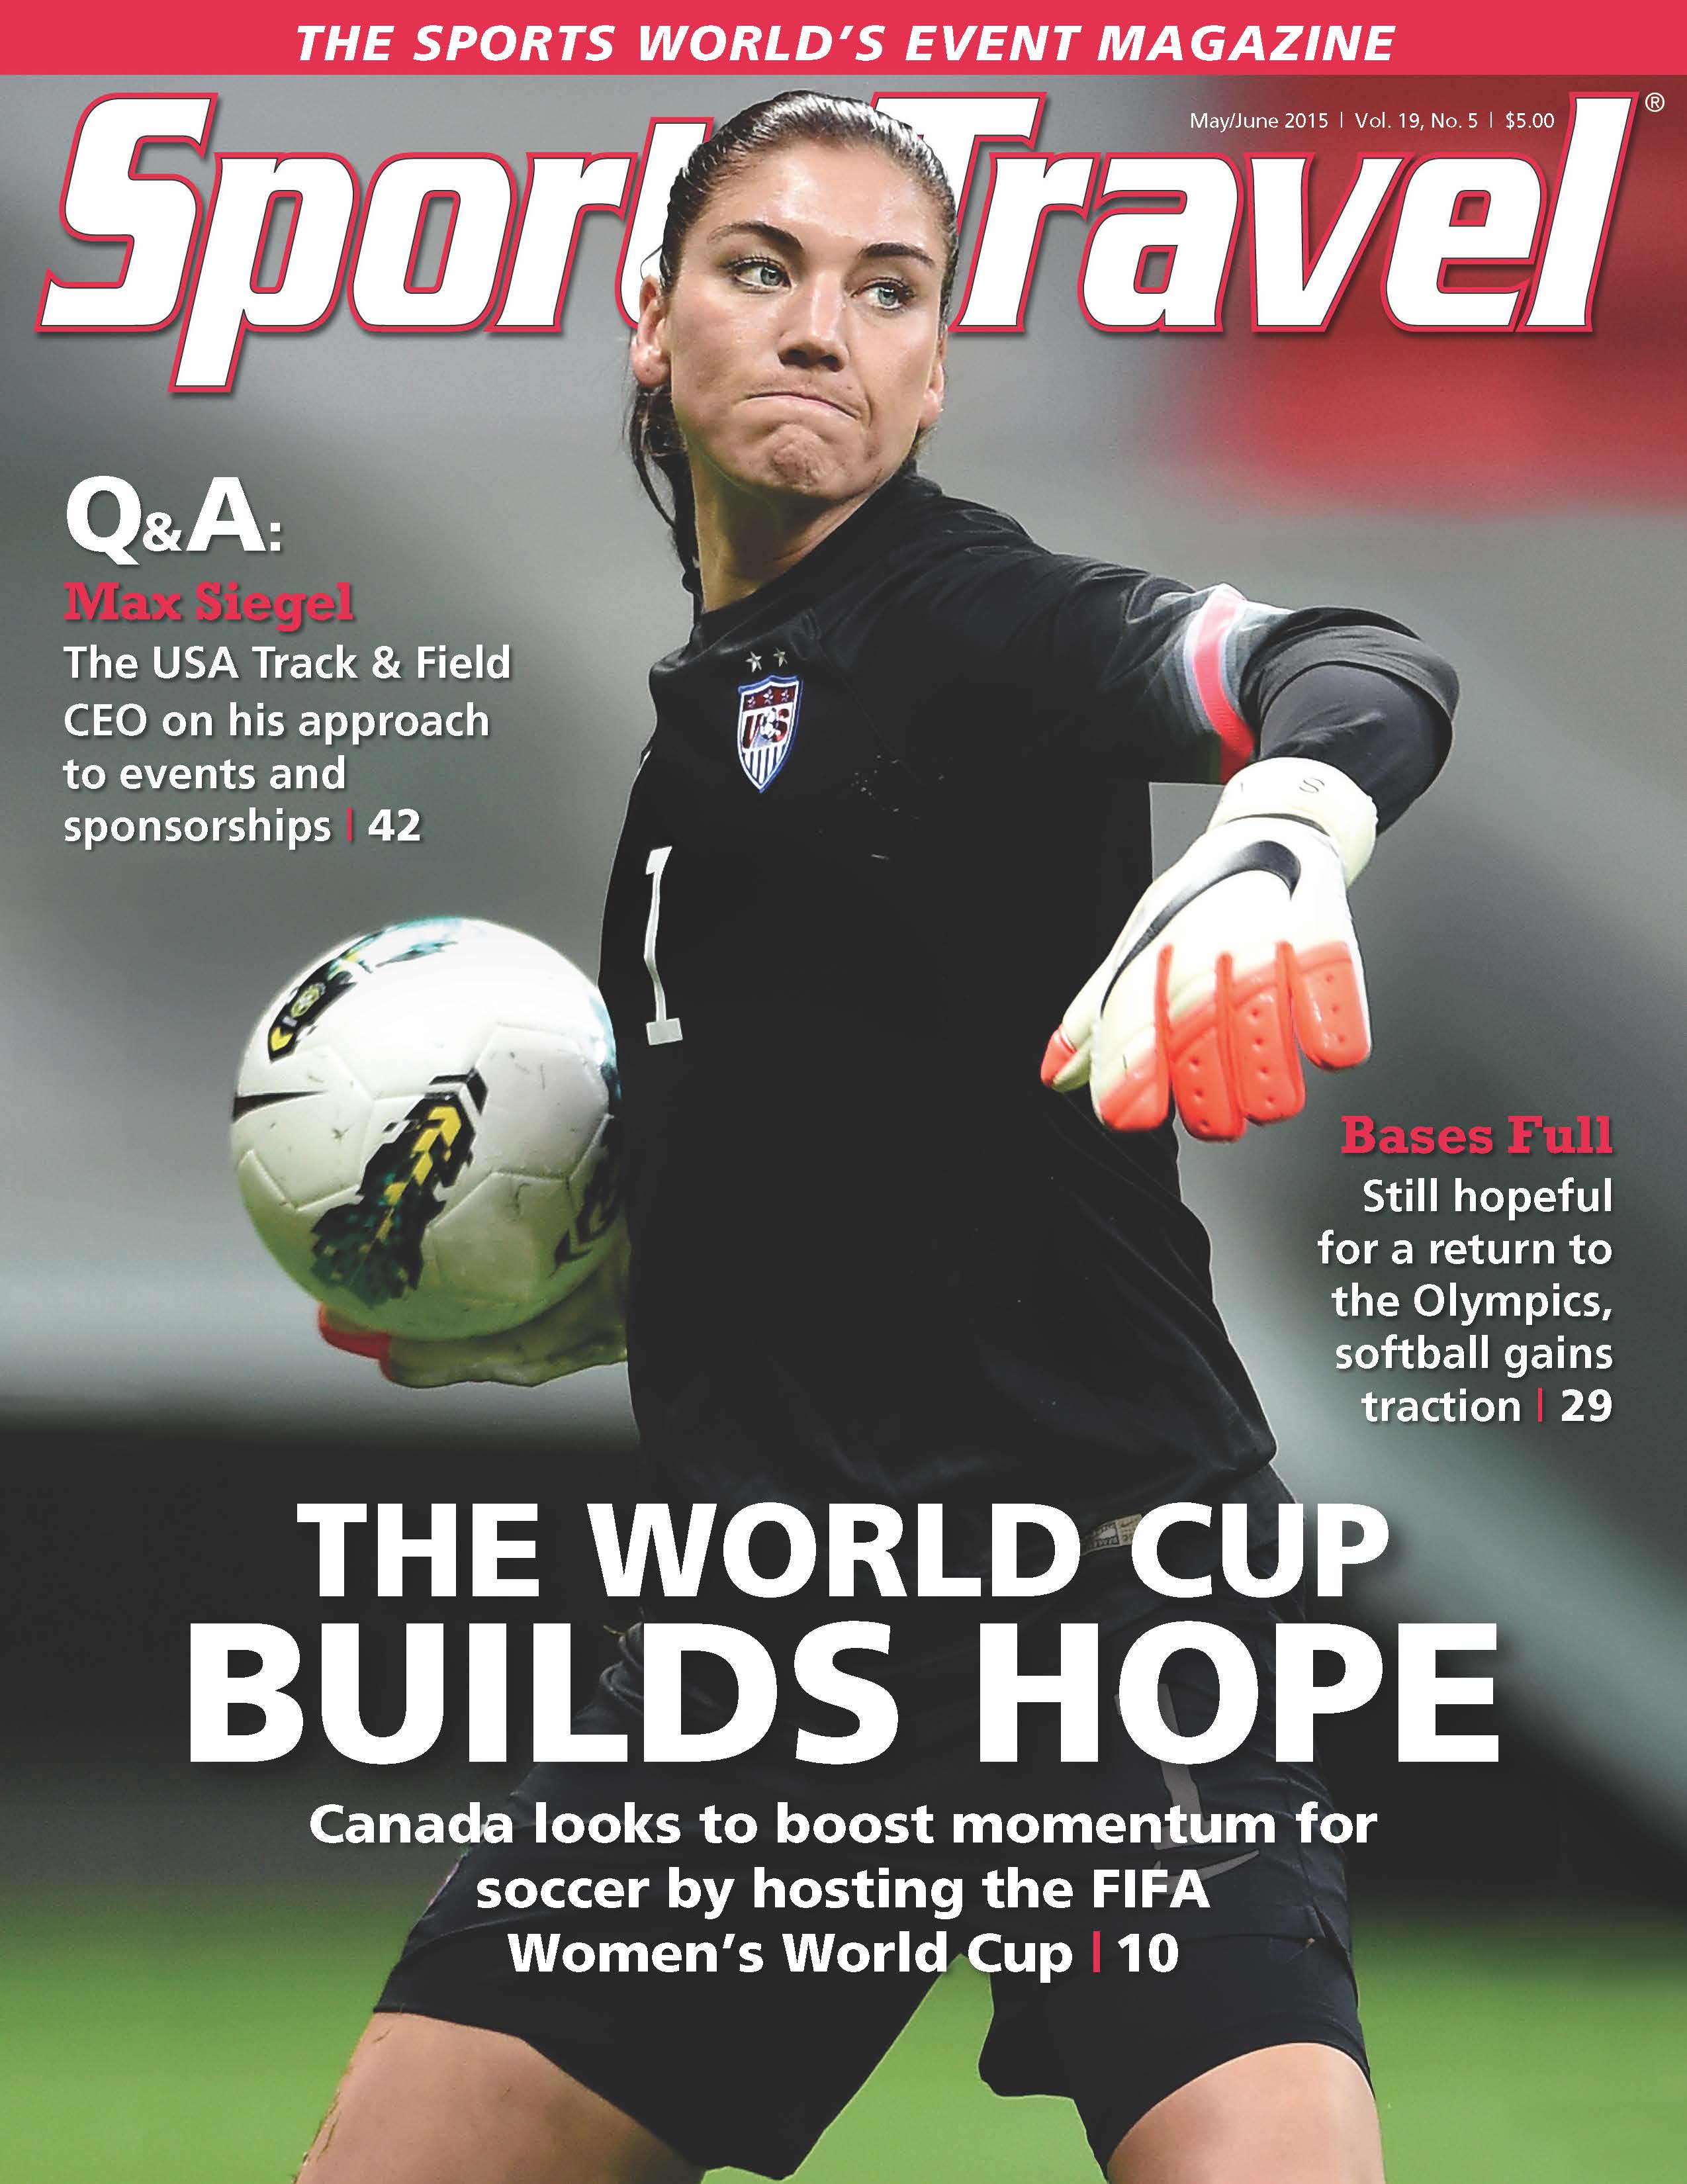 May/June 2015 cover